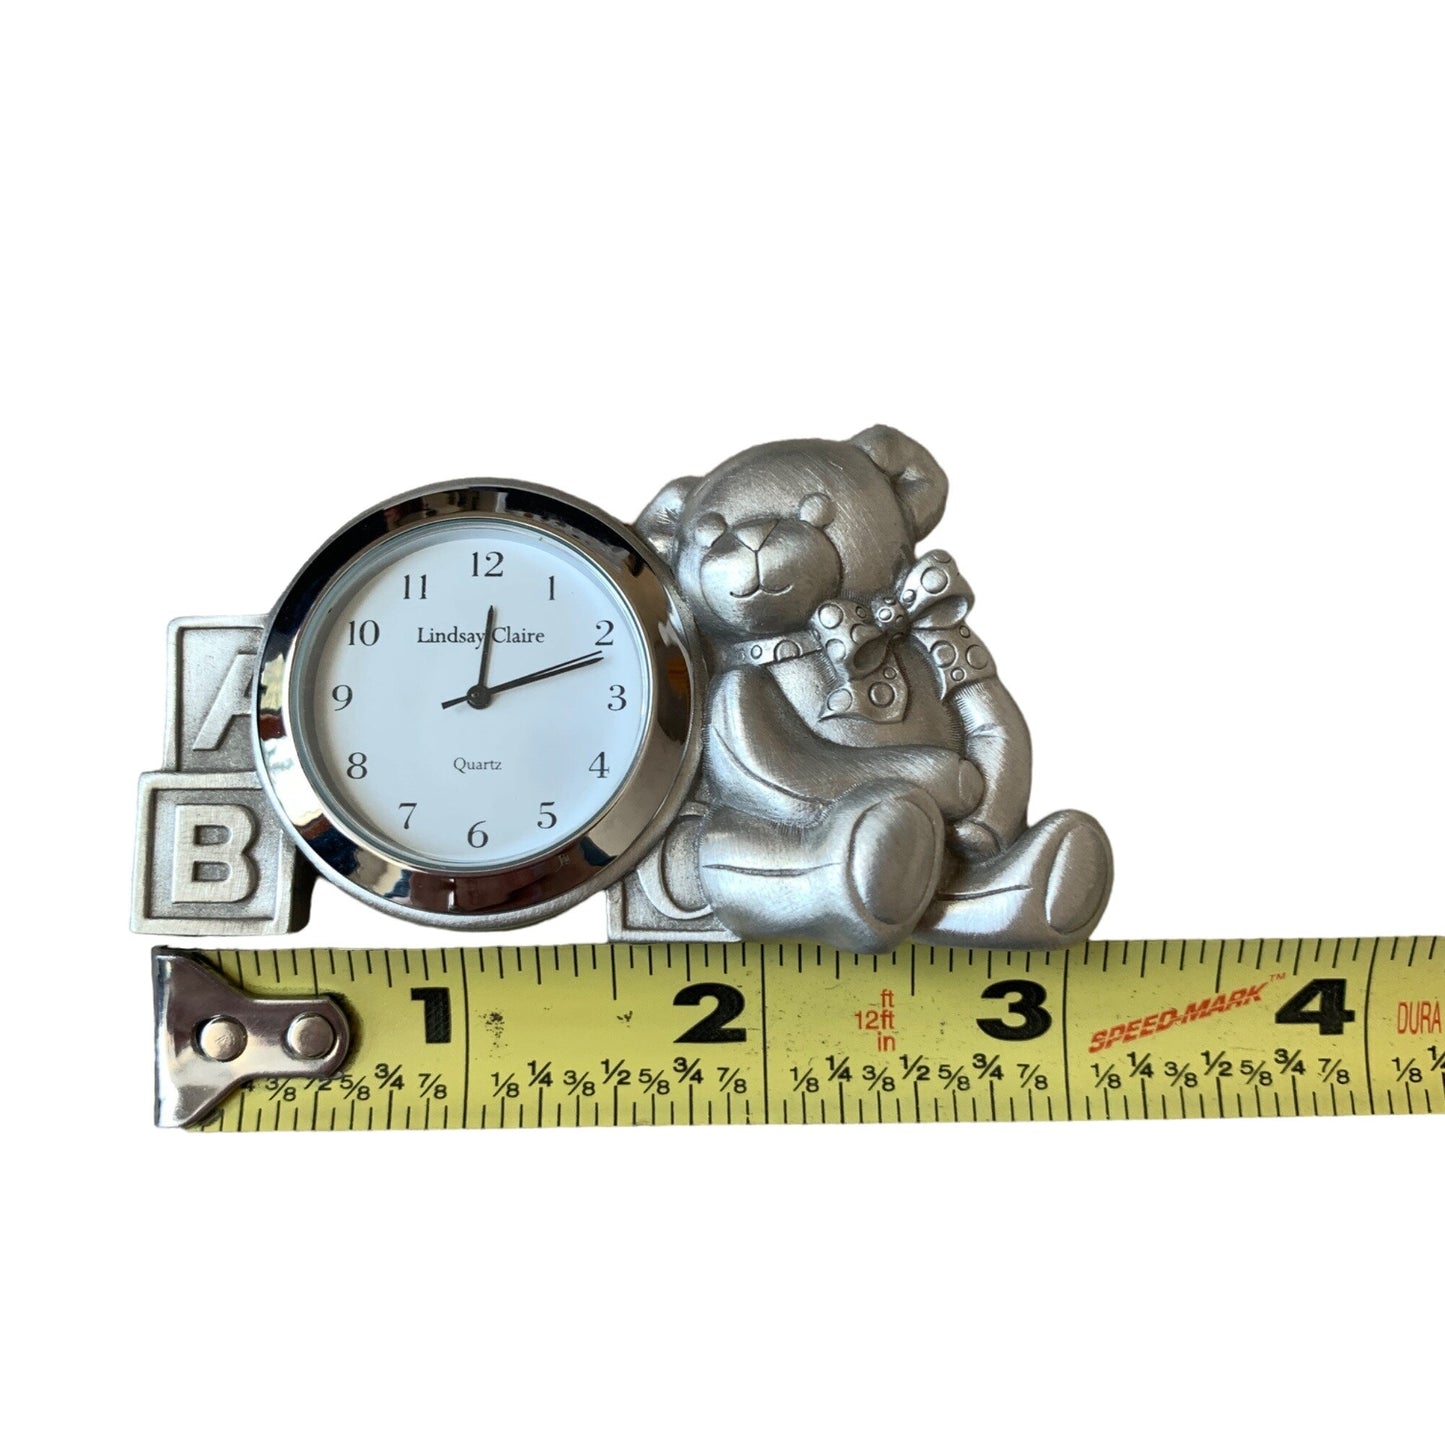 Lindsay Claire Fine Pewter Bear Small Clock UNTESTED